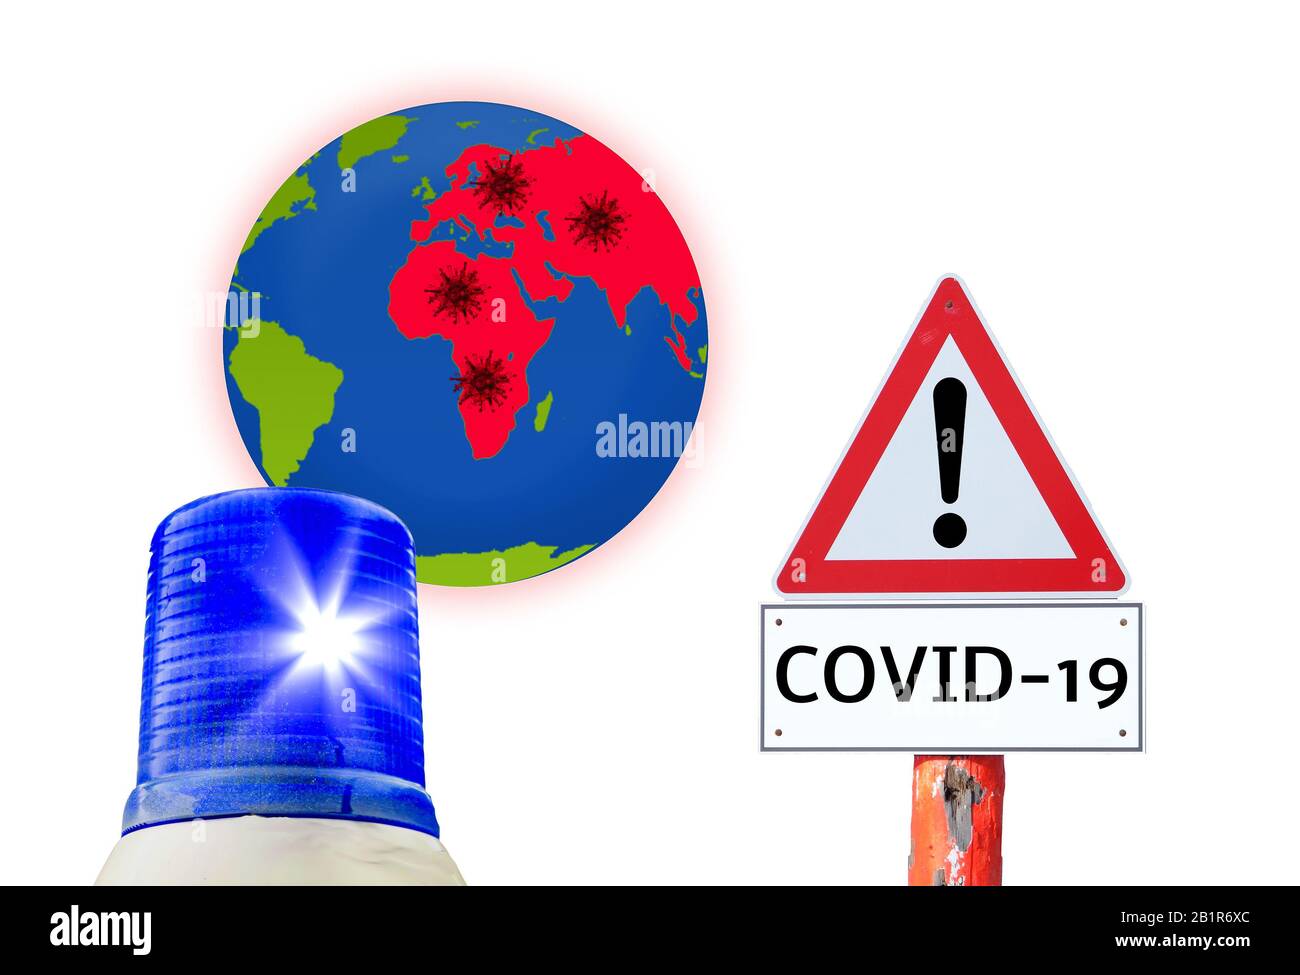 COVID-19 warning sign with globe Stock Photo